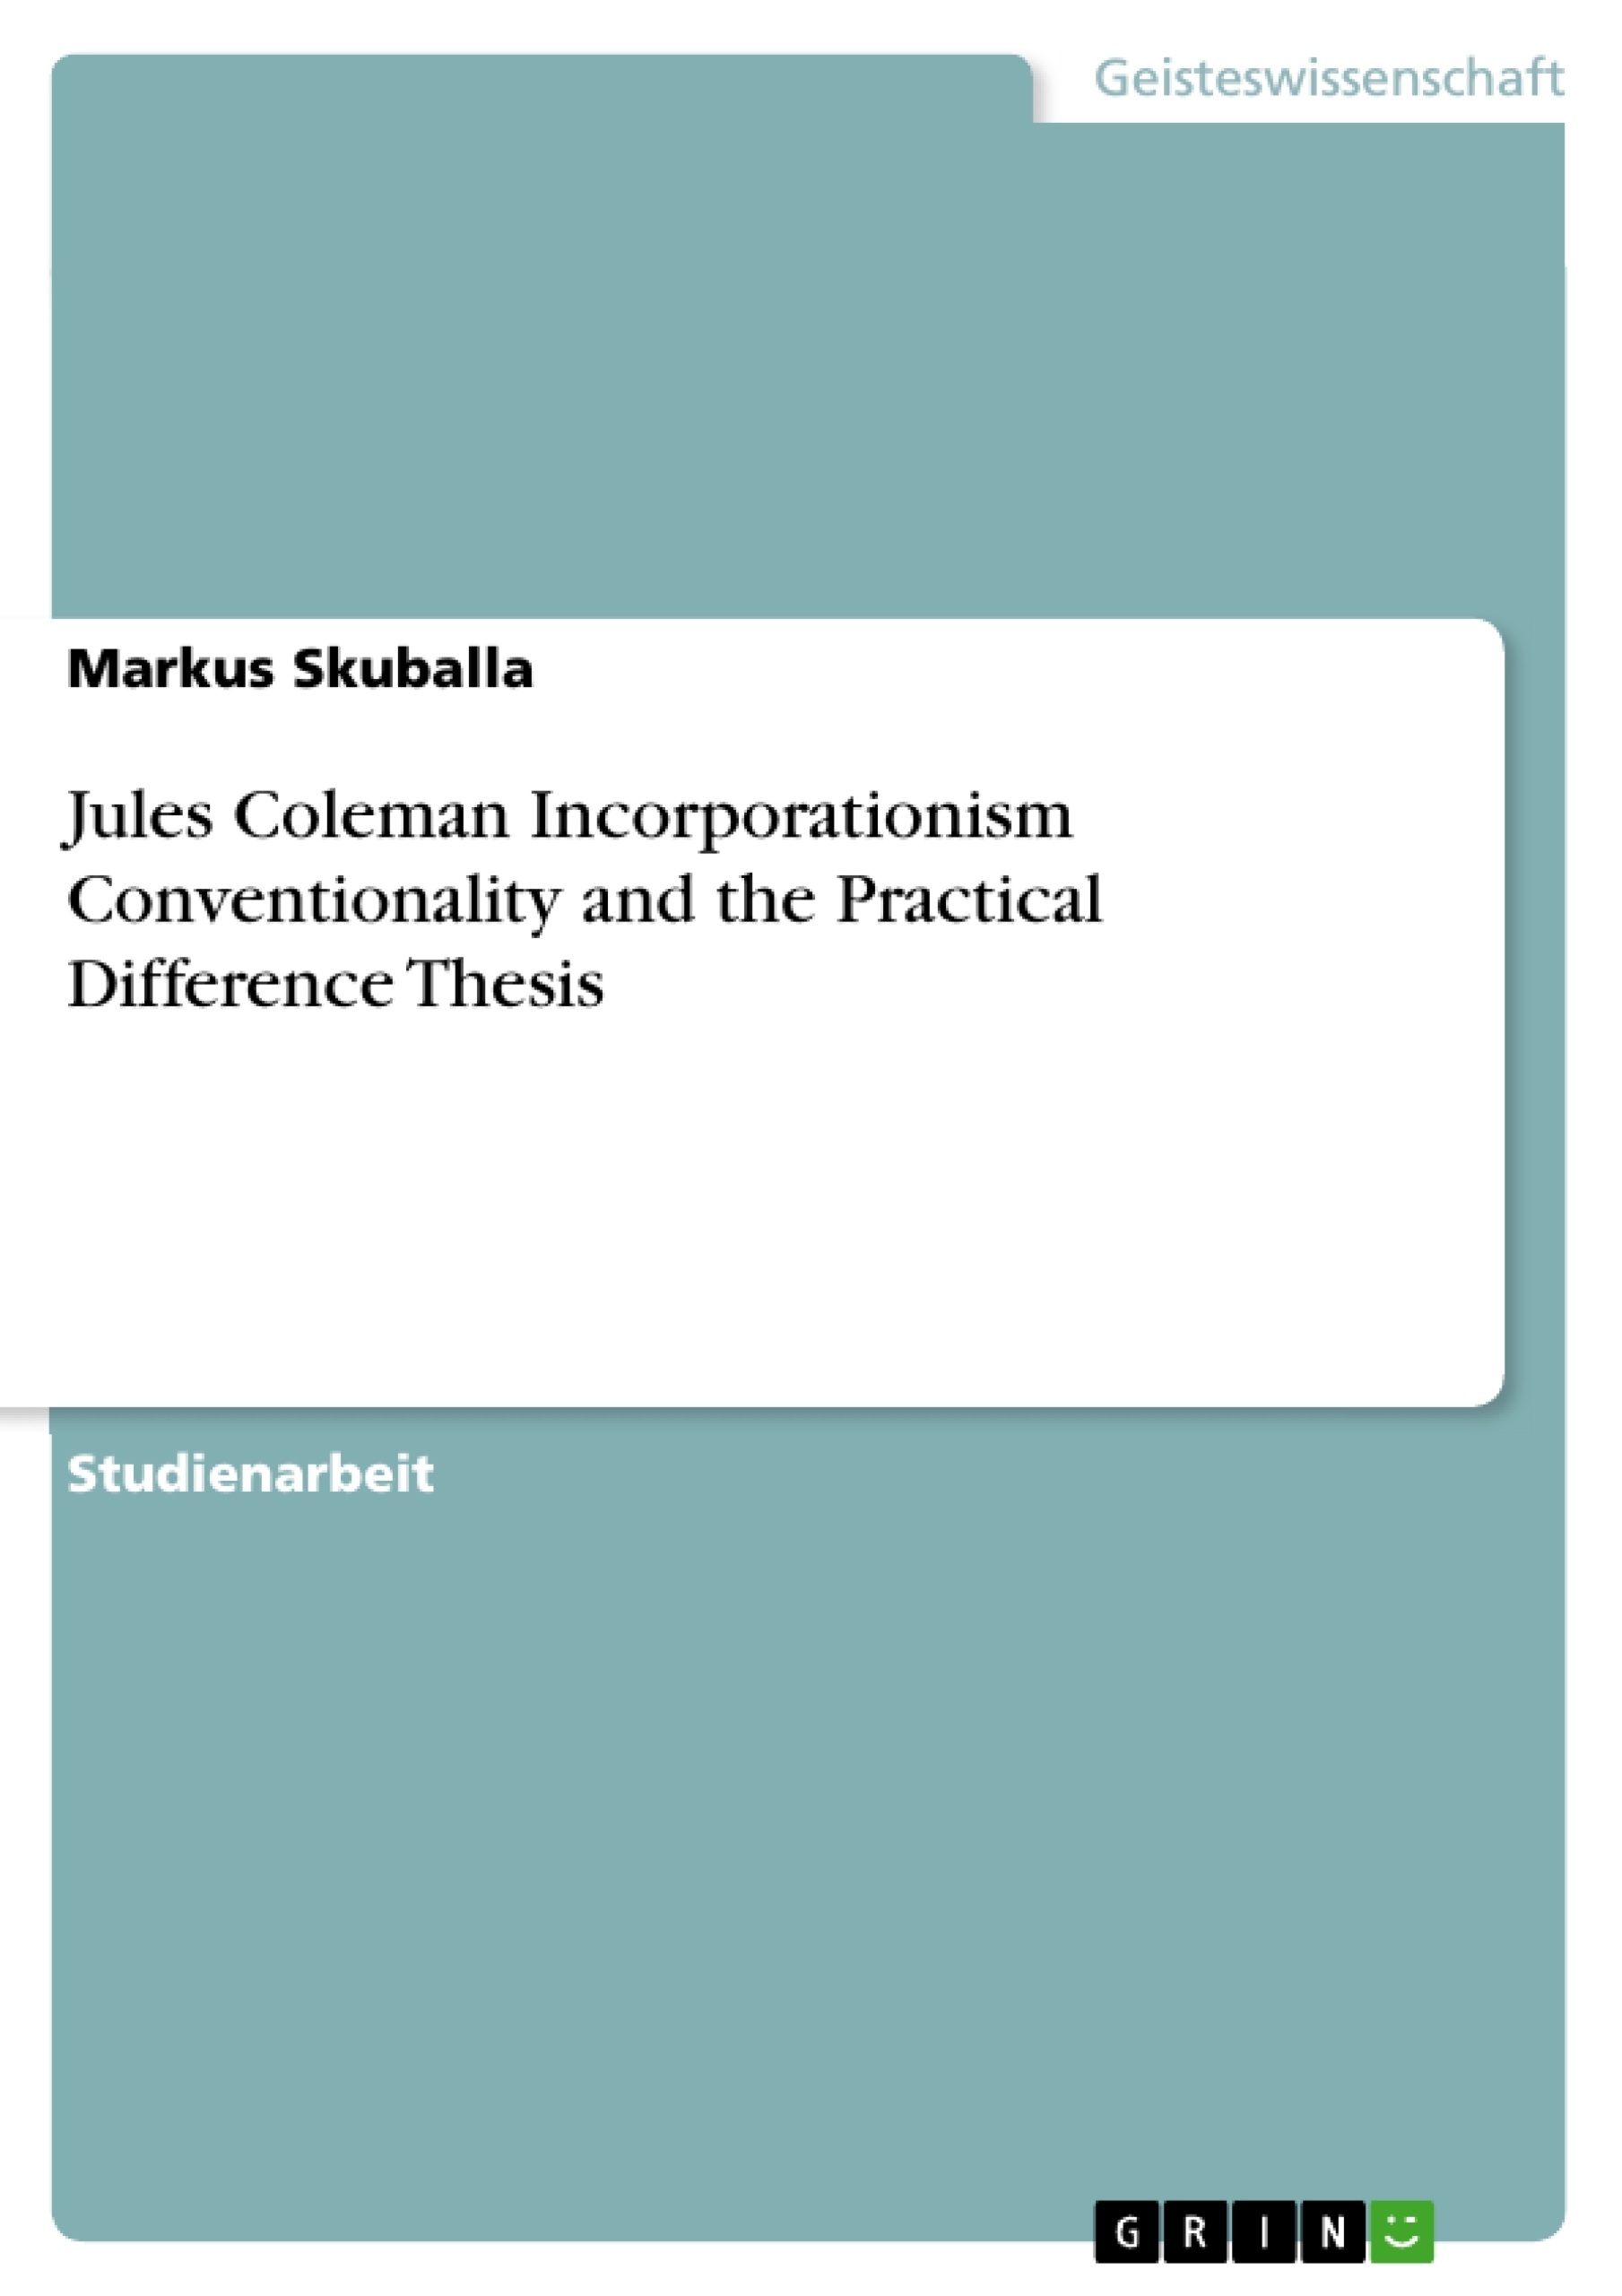 Titel: Jules Coleman Incorporationism Conventionality and the Practical Difference Thesis